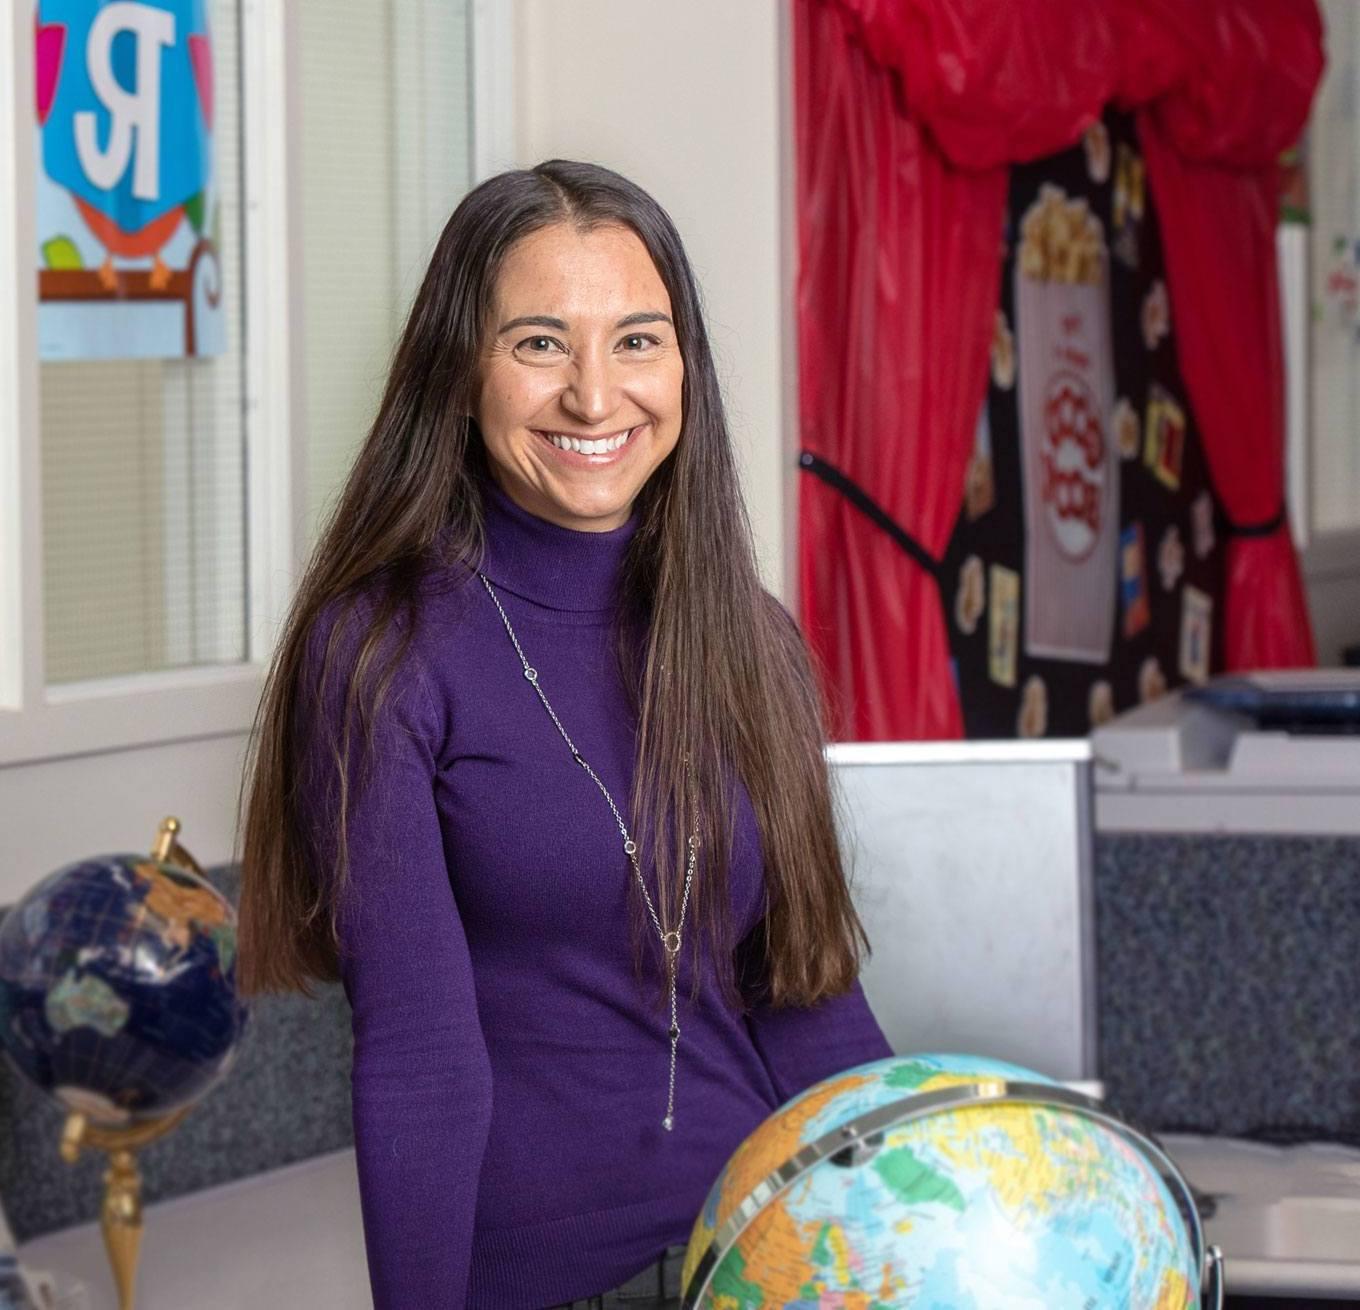 A headshot of Lauren, a teacher with long hair, wearing a long-sleeved shirt, siitting next to a globe in her classroom